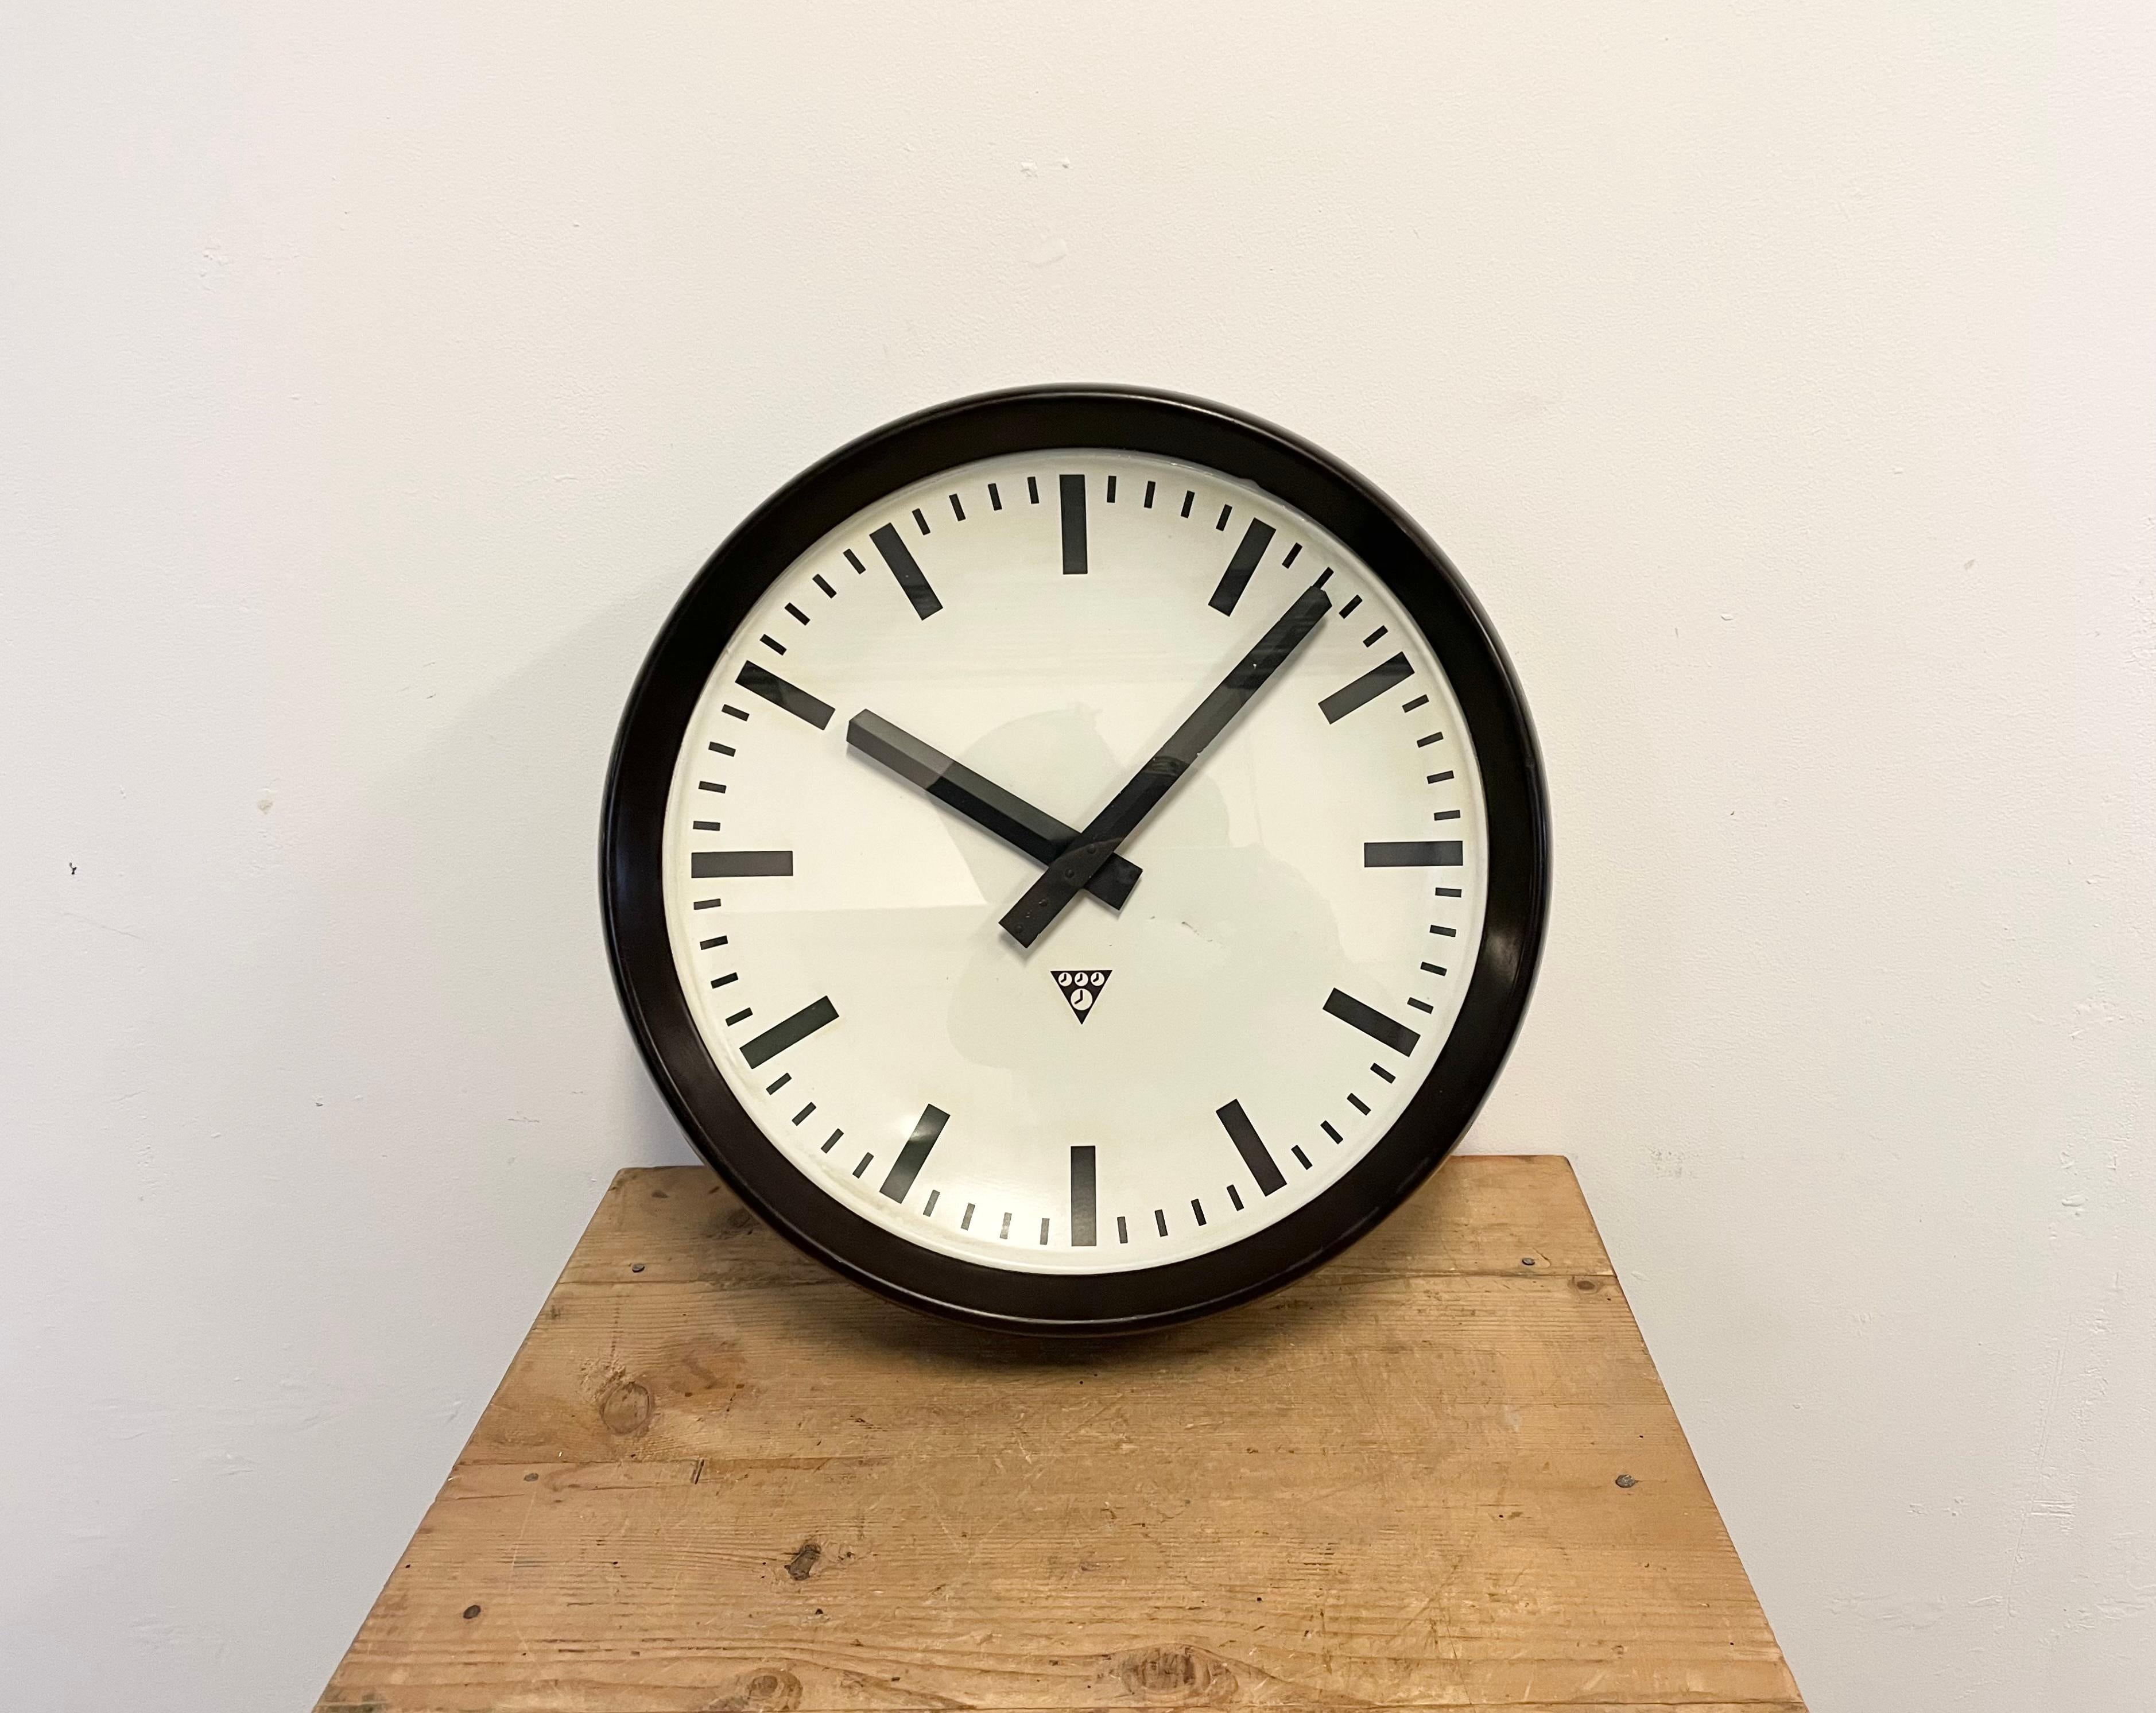 This large wall clock was produced by Pragotron in former Czechoslovakia during the 1960s. It features a brown bakelite frame, an aluminium dial, an aluminium hands and a clear glass cover. The piece has been converted into a battery-powered